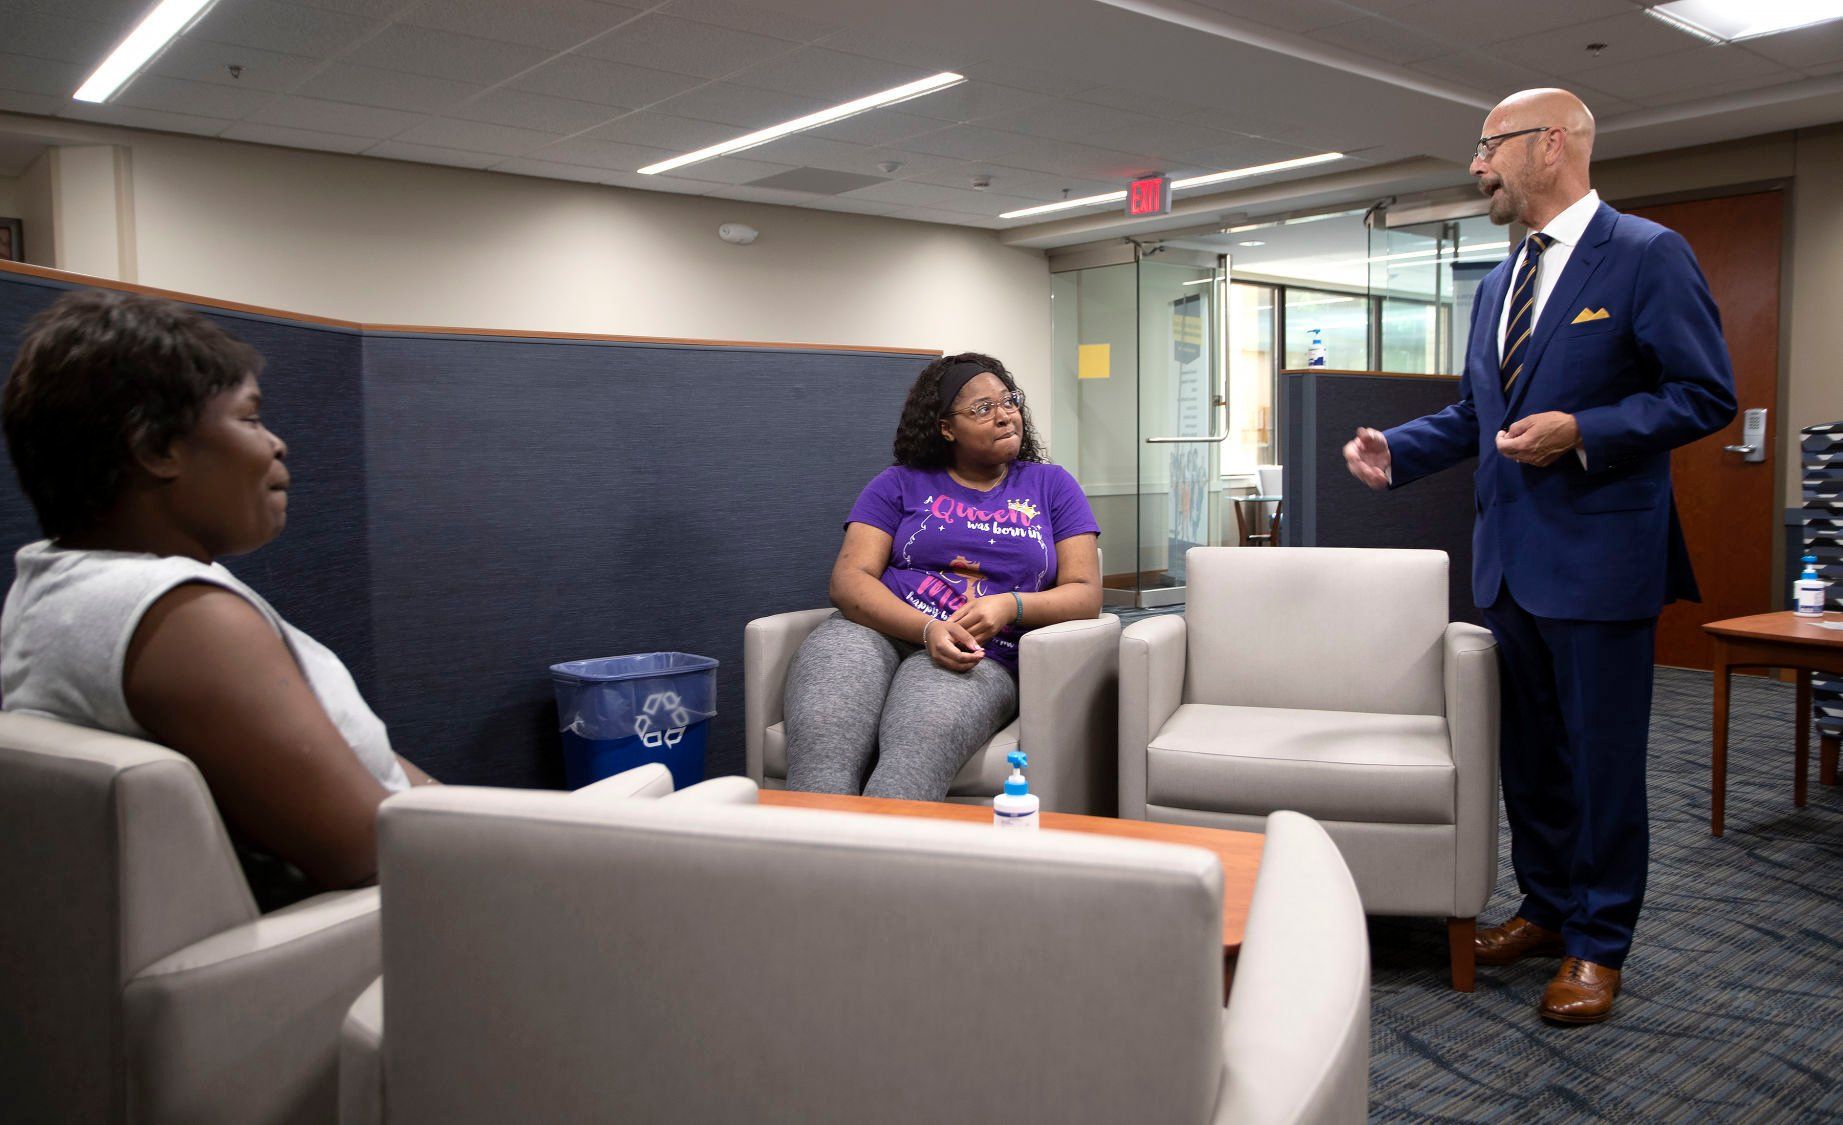 Northeast Iowa Community College President Herbert Riedel (far right) speaks with students Yolanda McDougal (left) and Breonna Doss at the Dubuque campus on Wednesday, June 29, 2022.    PHOTO CREDIT: Stephen Gassman